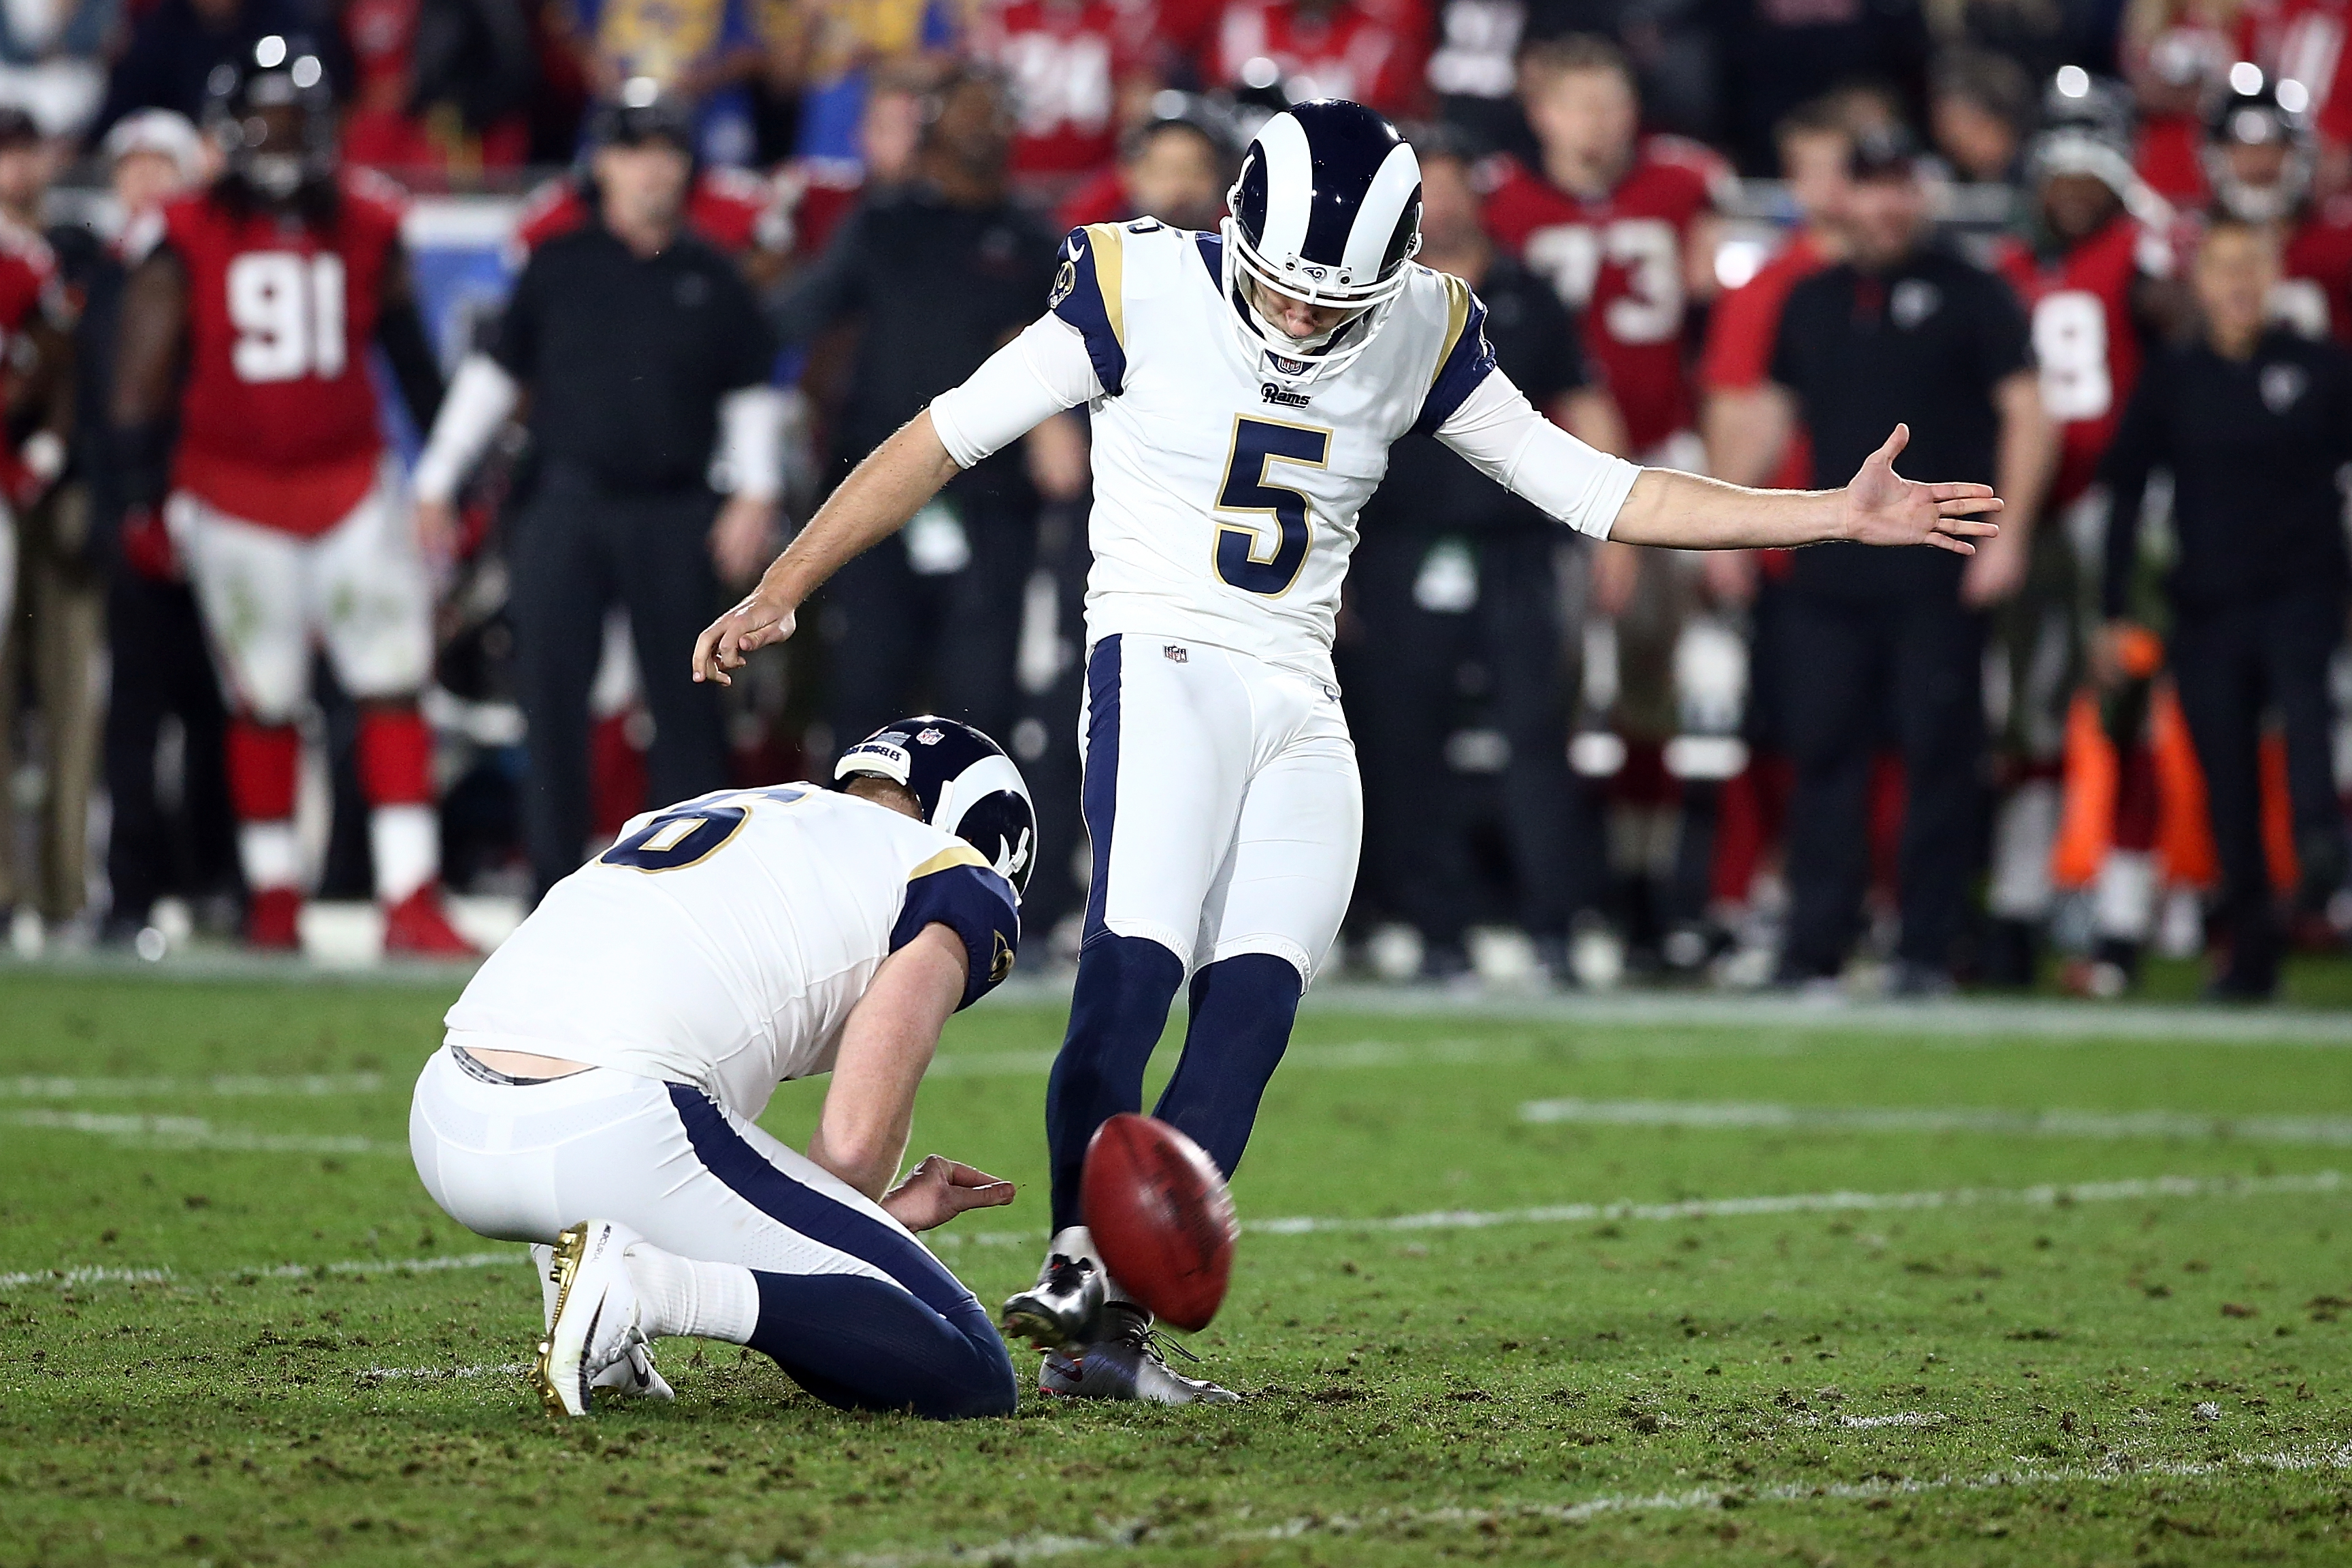 Los Angeles Rams K Sam Ficken kicks a field goal against the Atlanta Falcons in the Wild Card Round of the 2018 NFL Playoffs